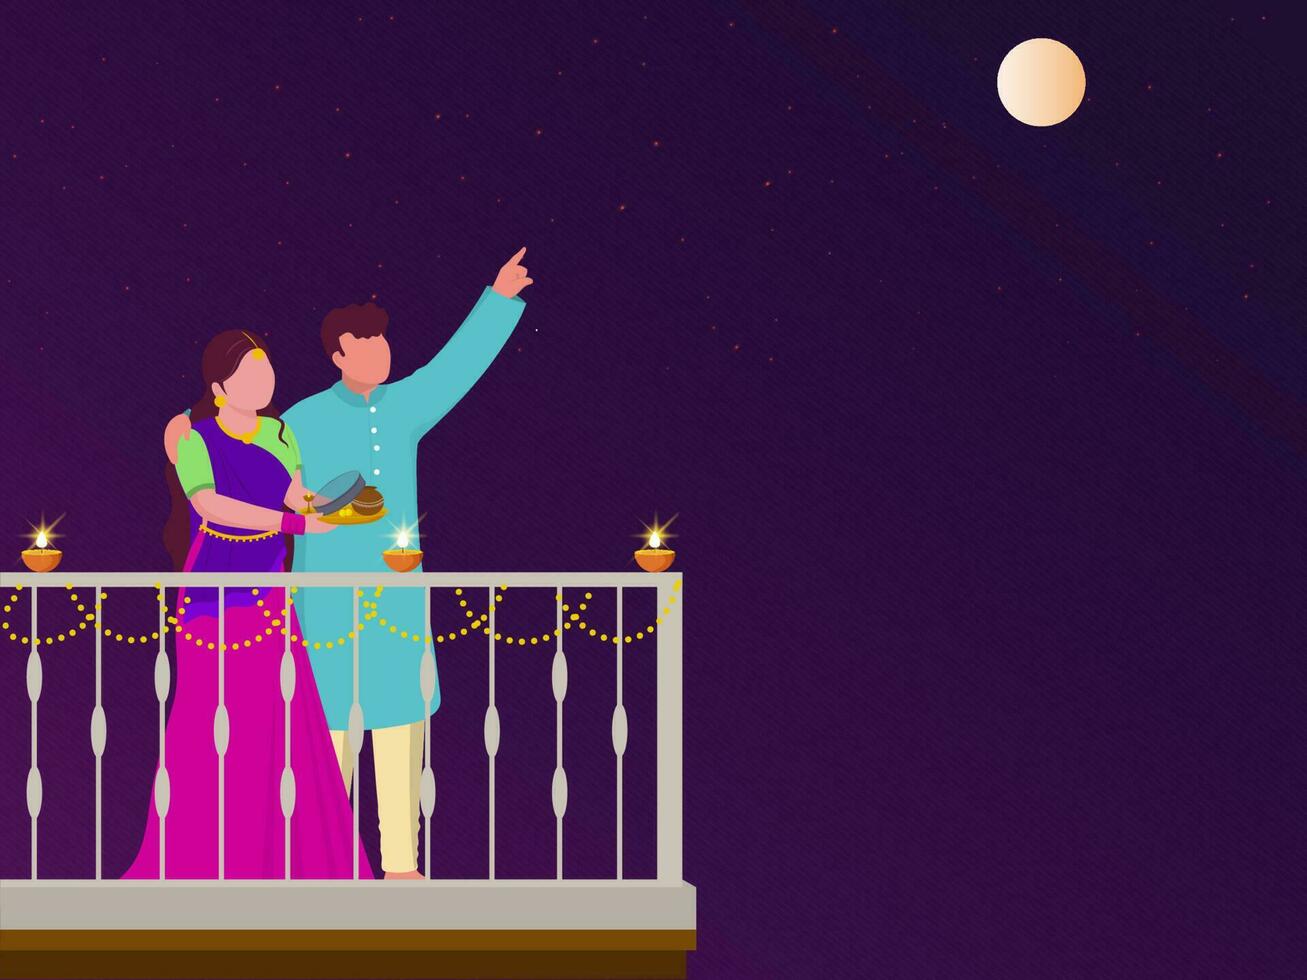 Indian Hindu Festival Karwa Chauth Concept with Young Indian Couple Performing Ritual in the Full Moon Night. vector